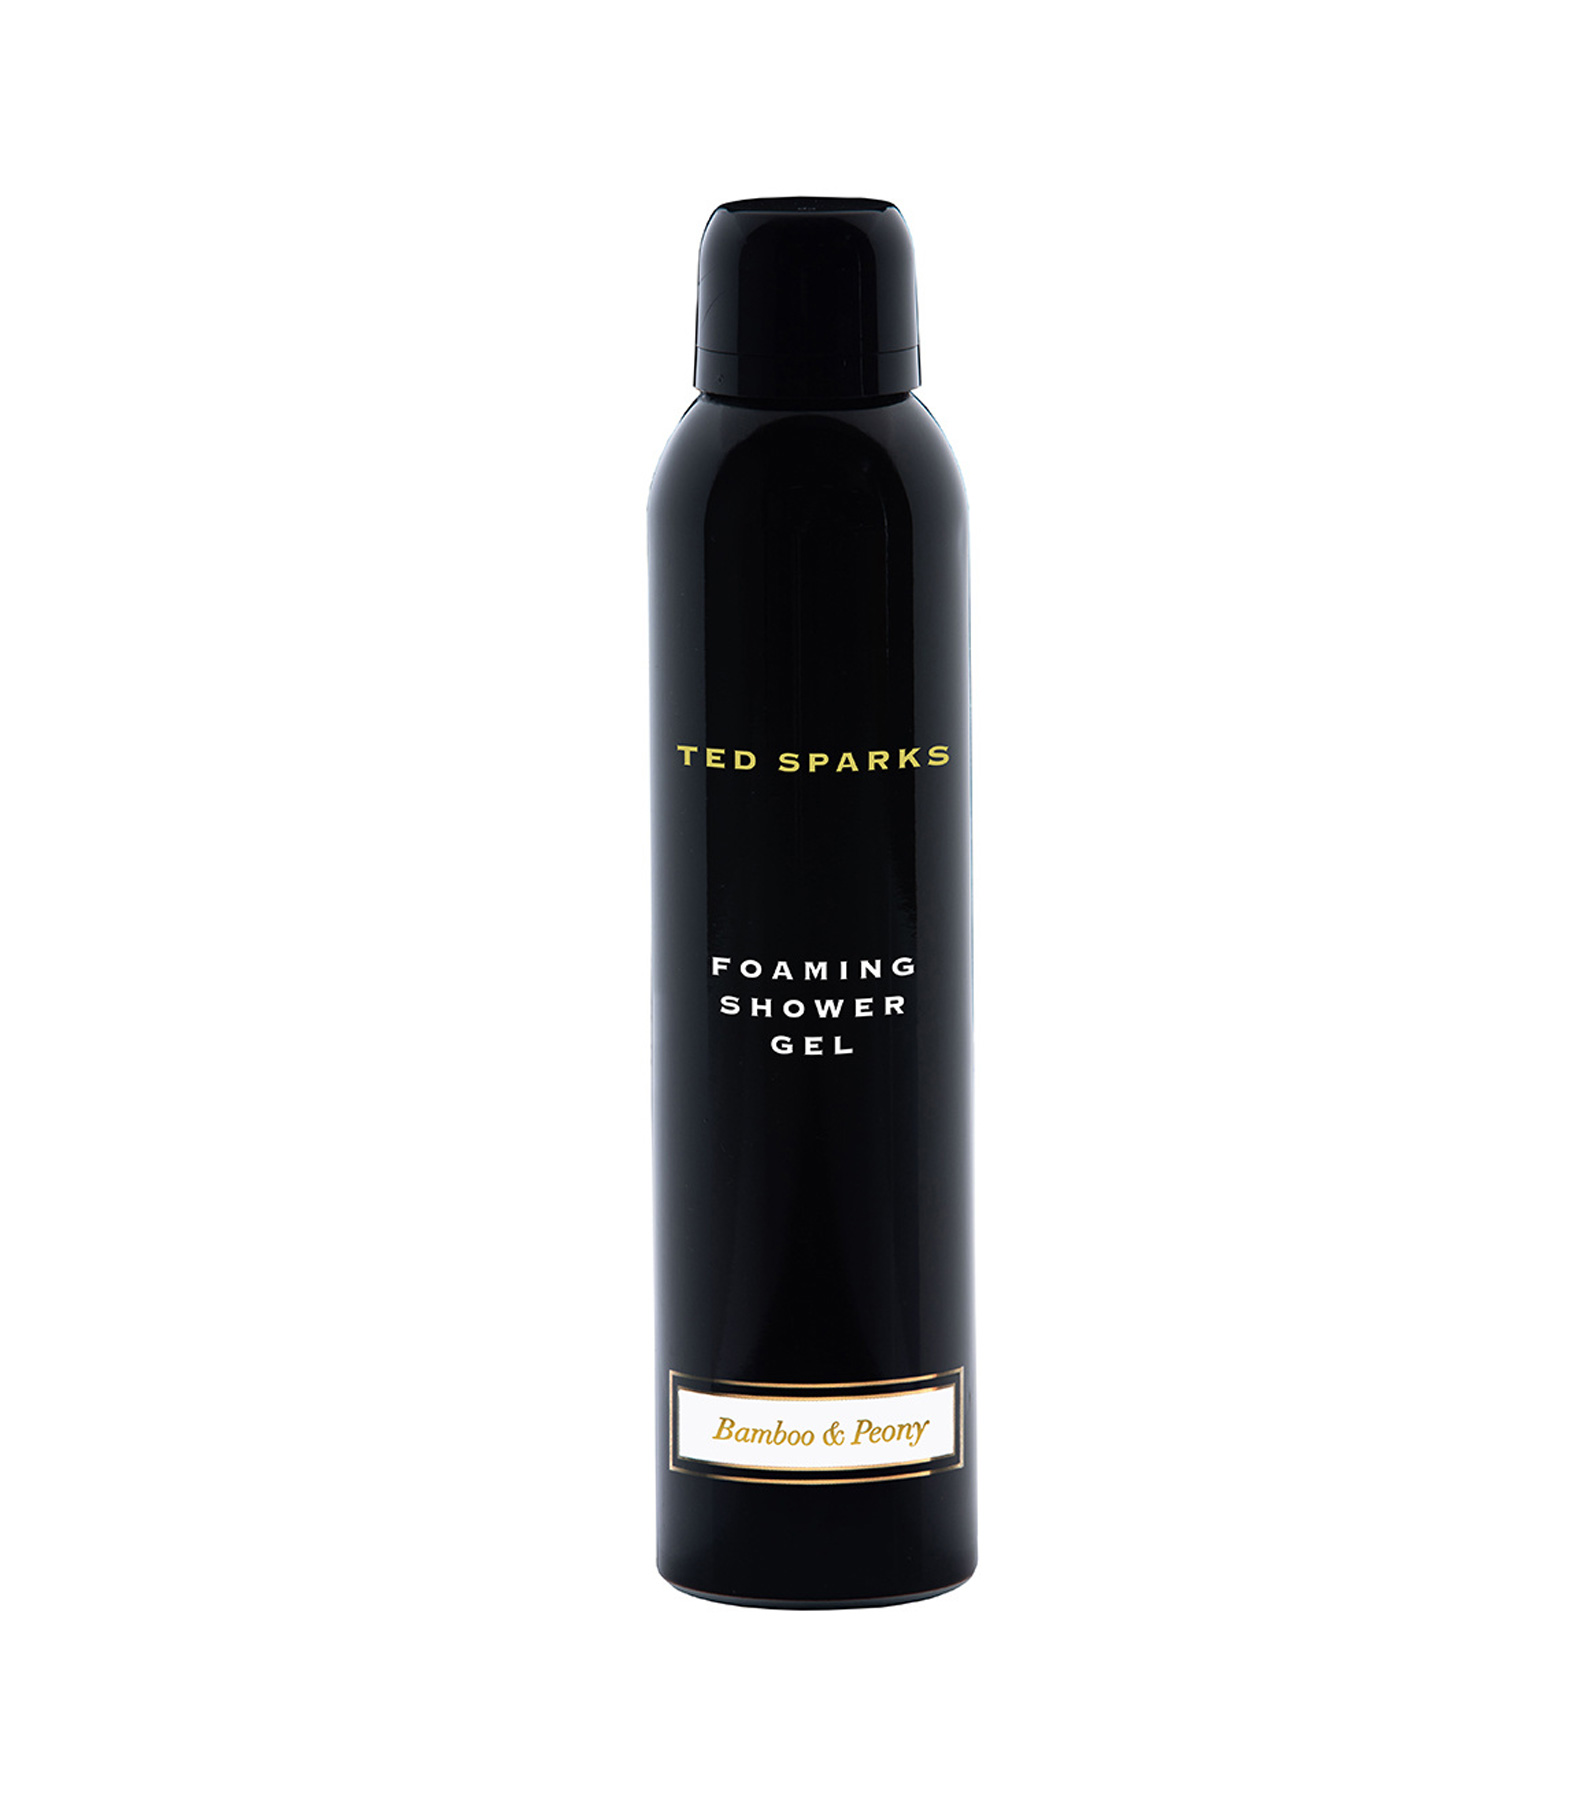 Ted-Sparks-Foaming-Shower-Bamboo-&-Peony